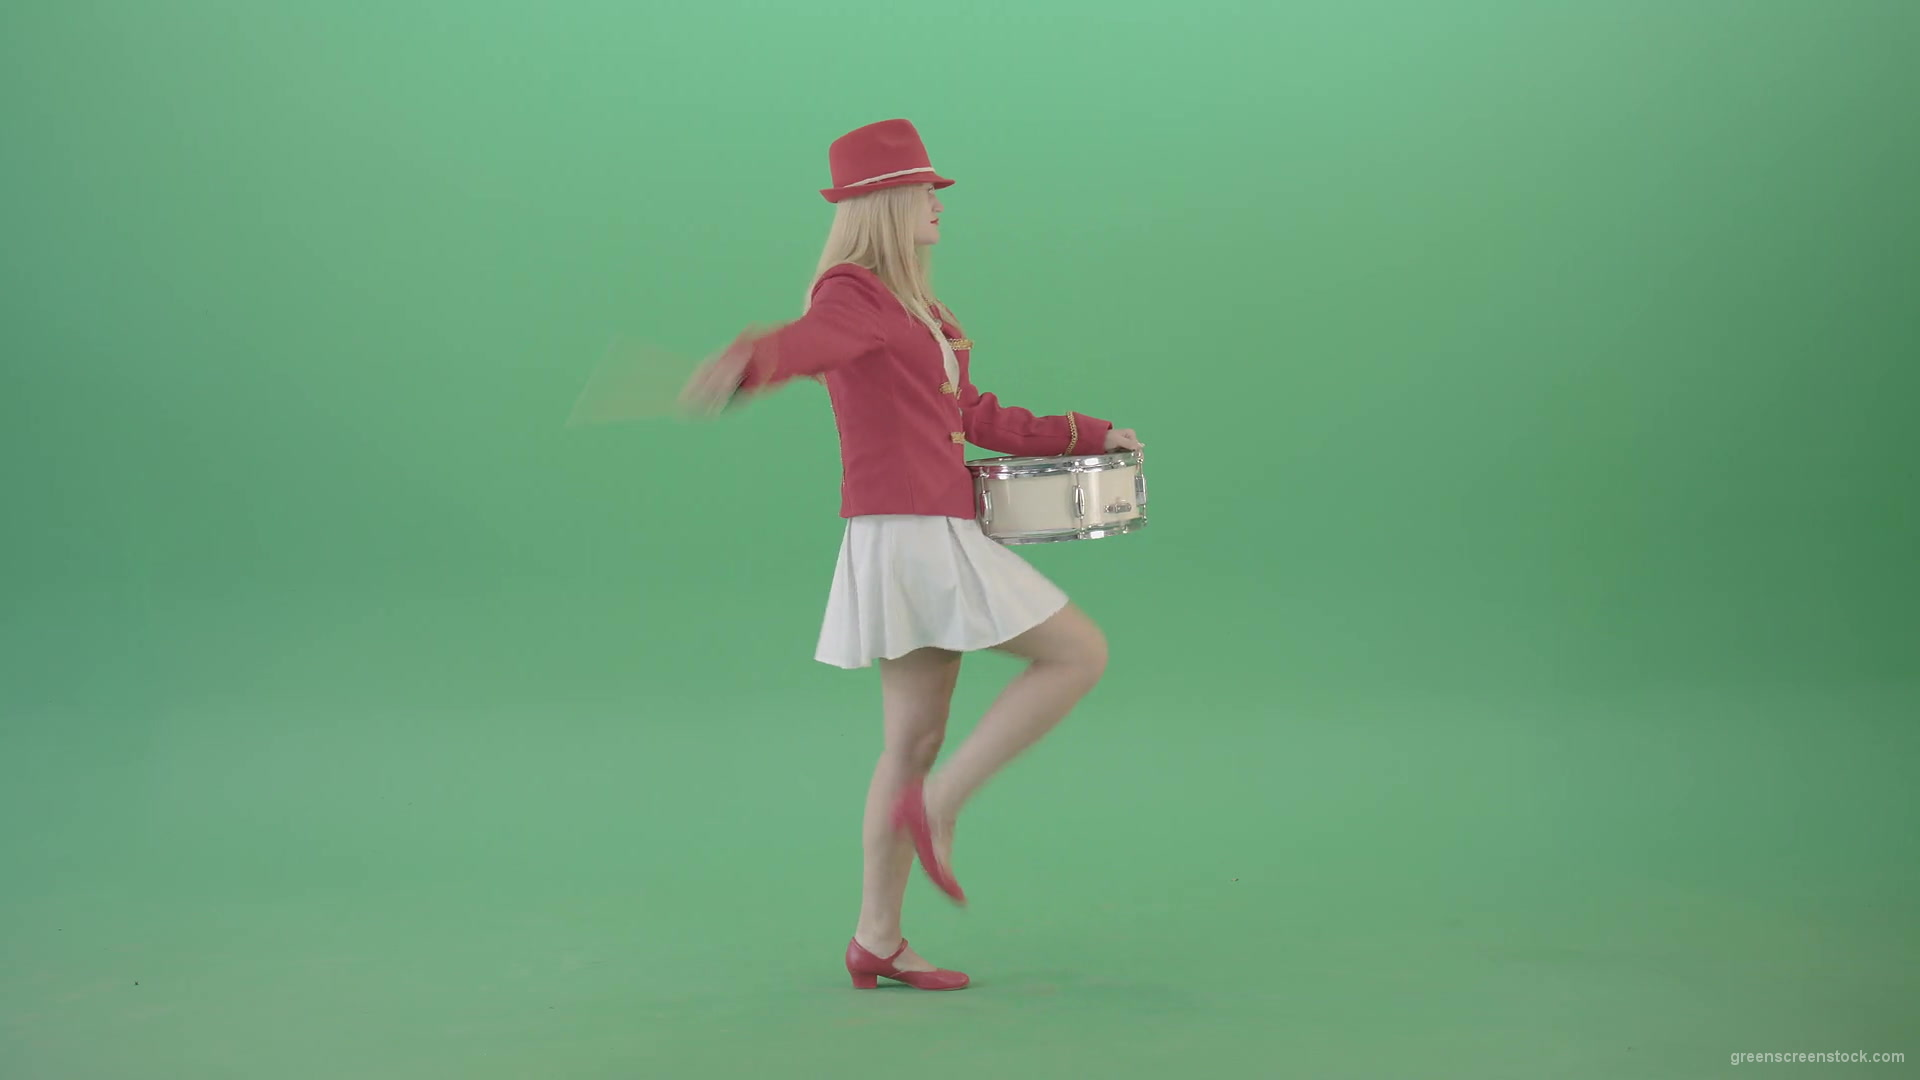 Side-view-marching-girl-play-white-snare-drum-in-red-uniform-on-green-screen-Video-Footage-1920_009 Green Screen Stock